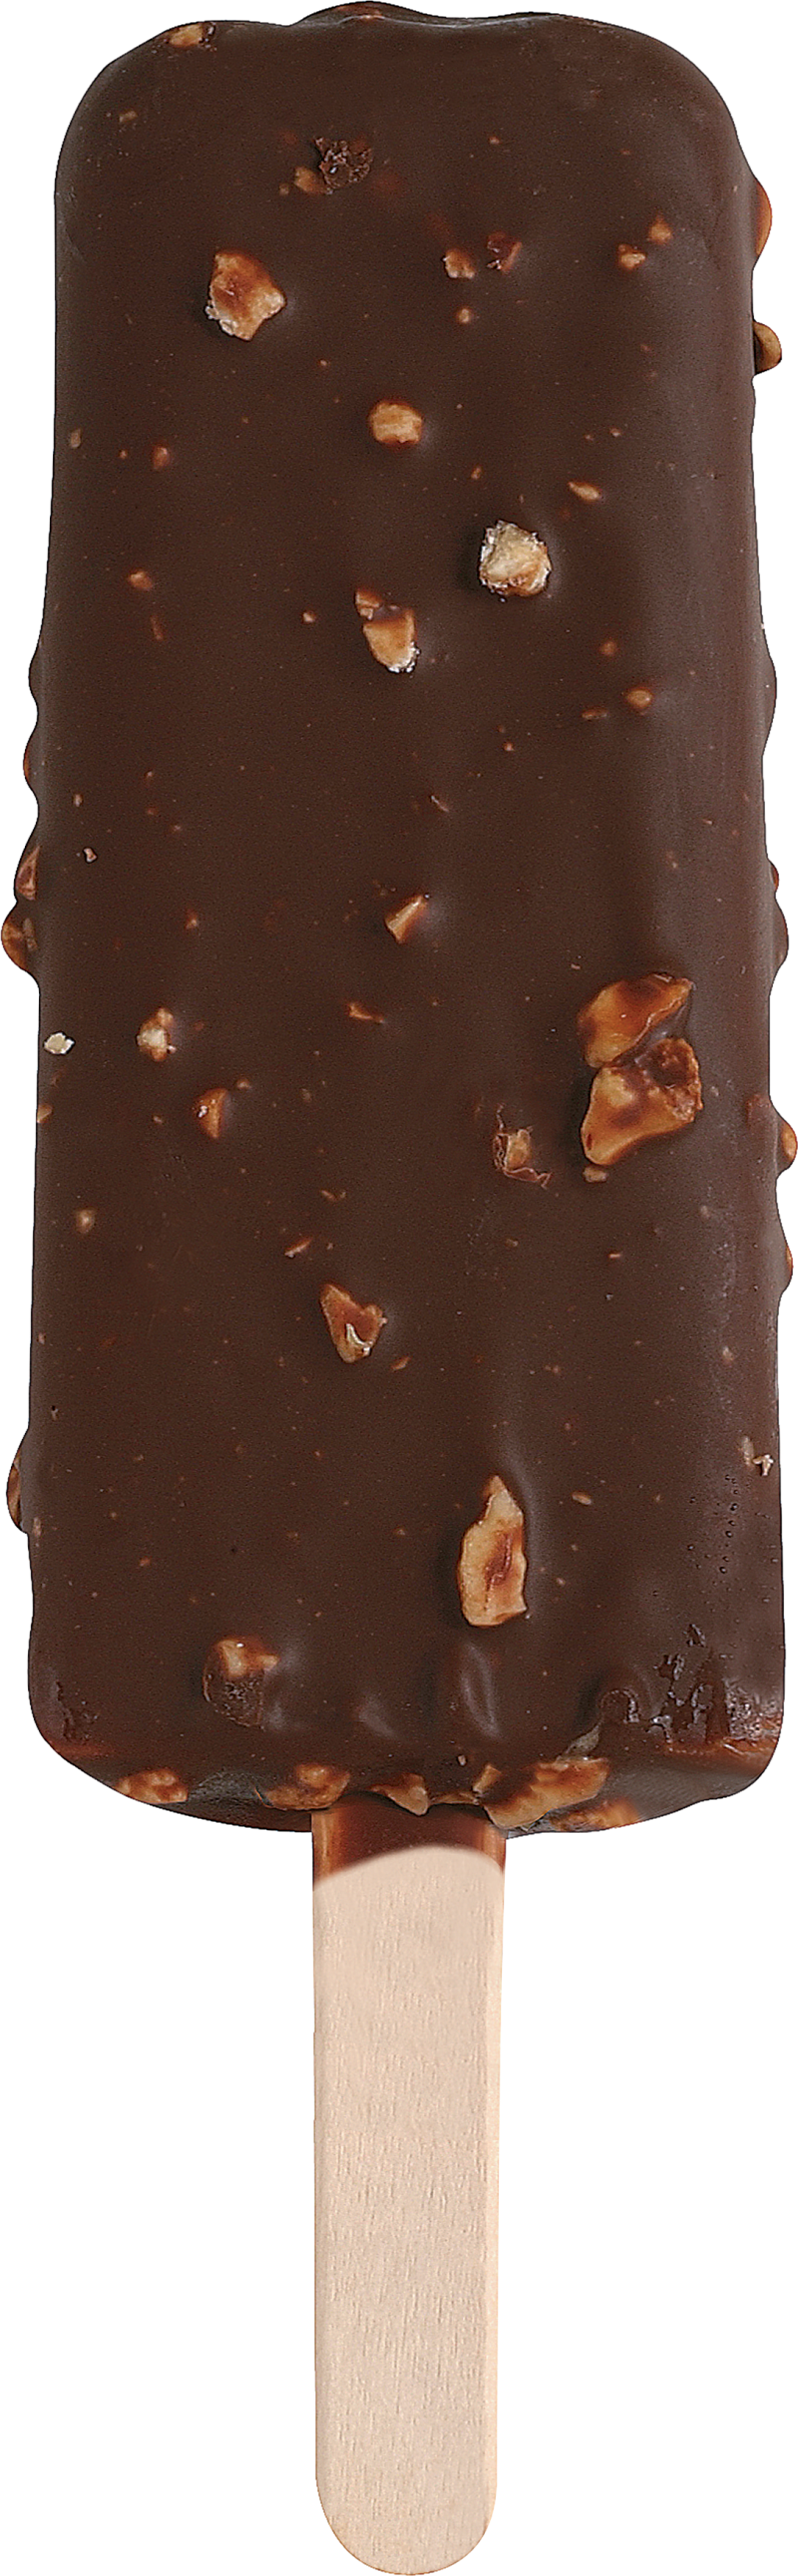 Chocolate Nuts Ice Lolly Png Image Purepng Free Transparent Cc0 Png